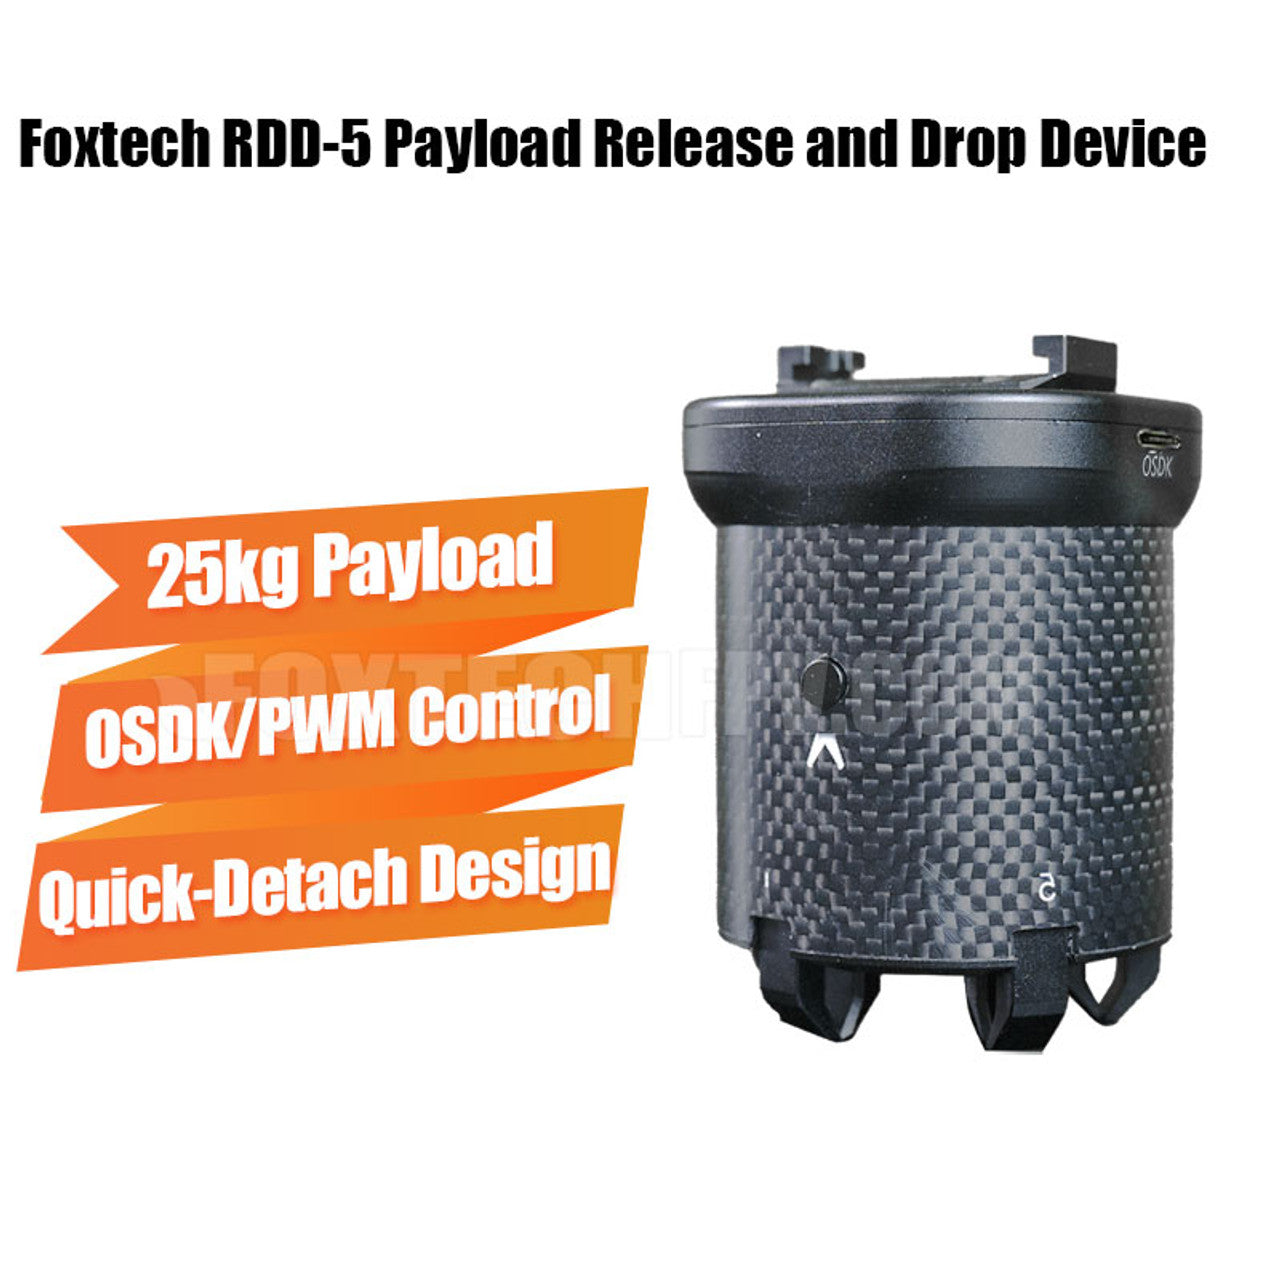 RDD-5 25KG Payload Release and Drop, Payload release device with OSDKPWM control, supports 25kg loads and detaches quickly.